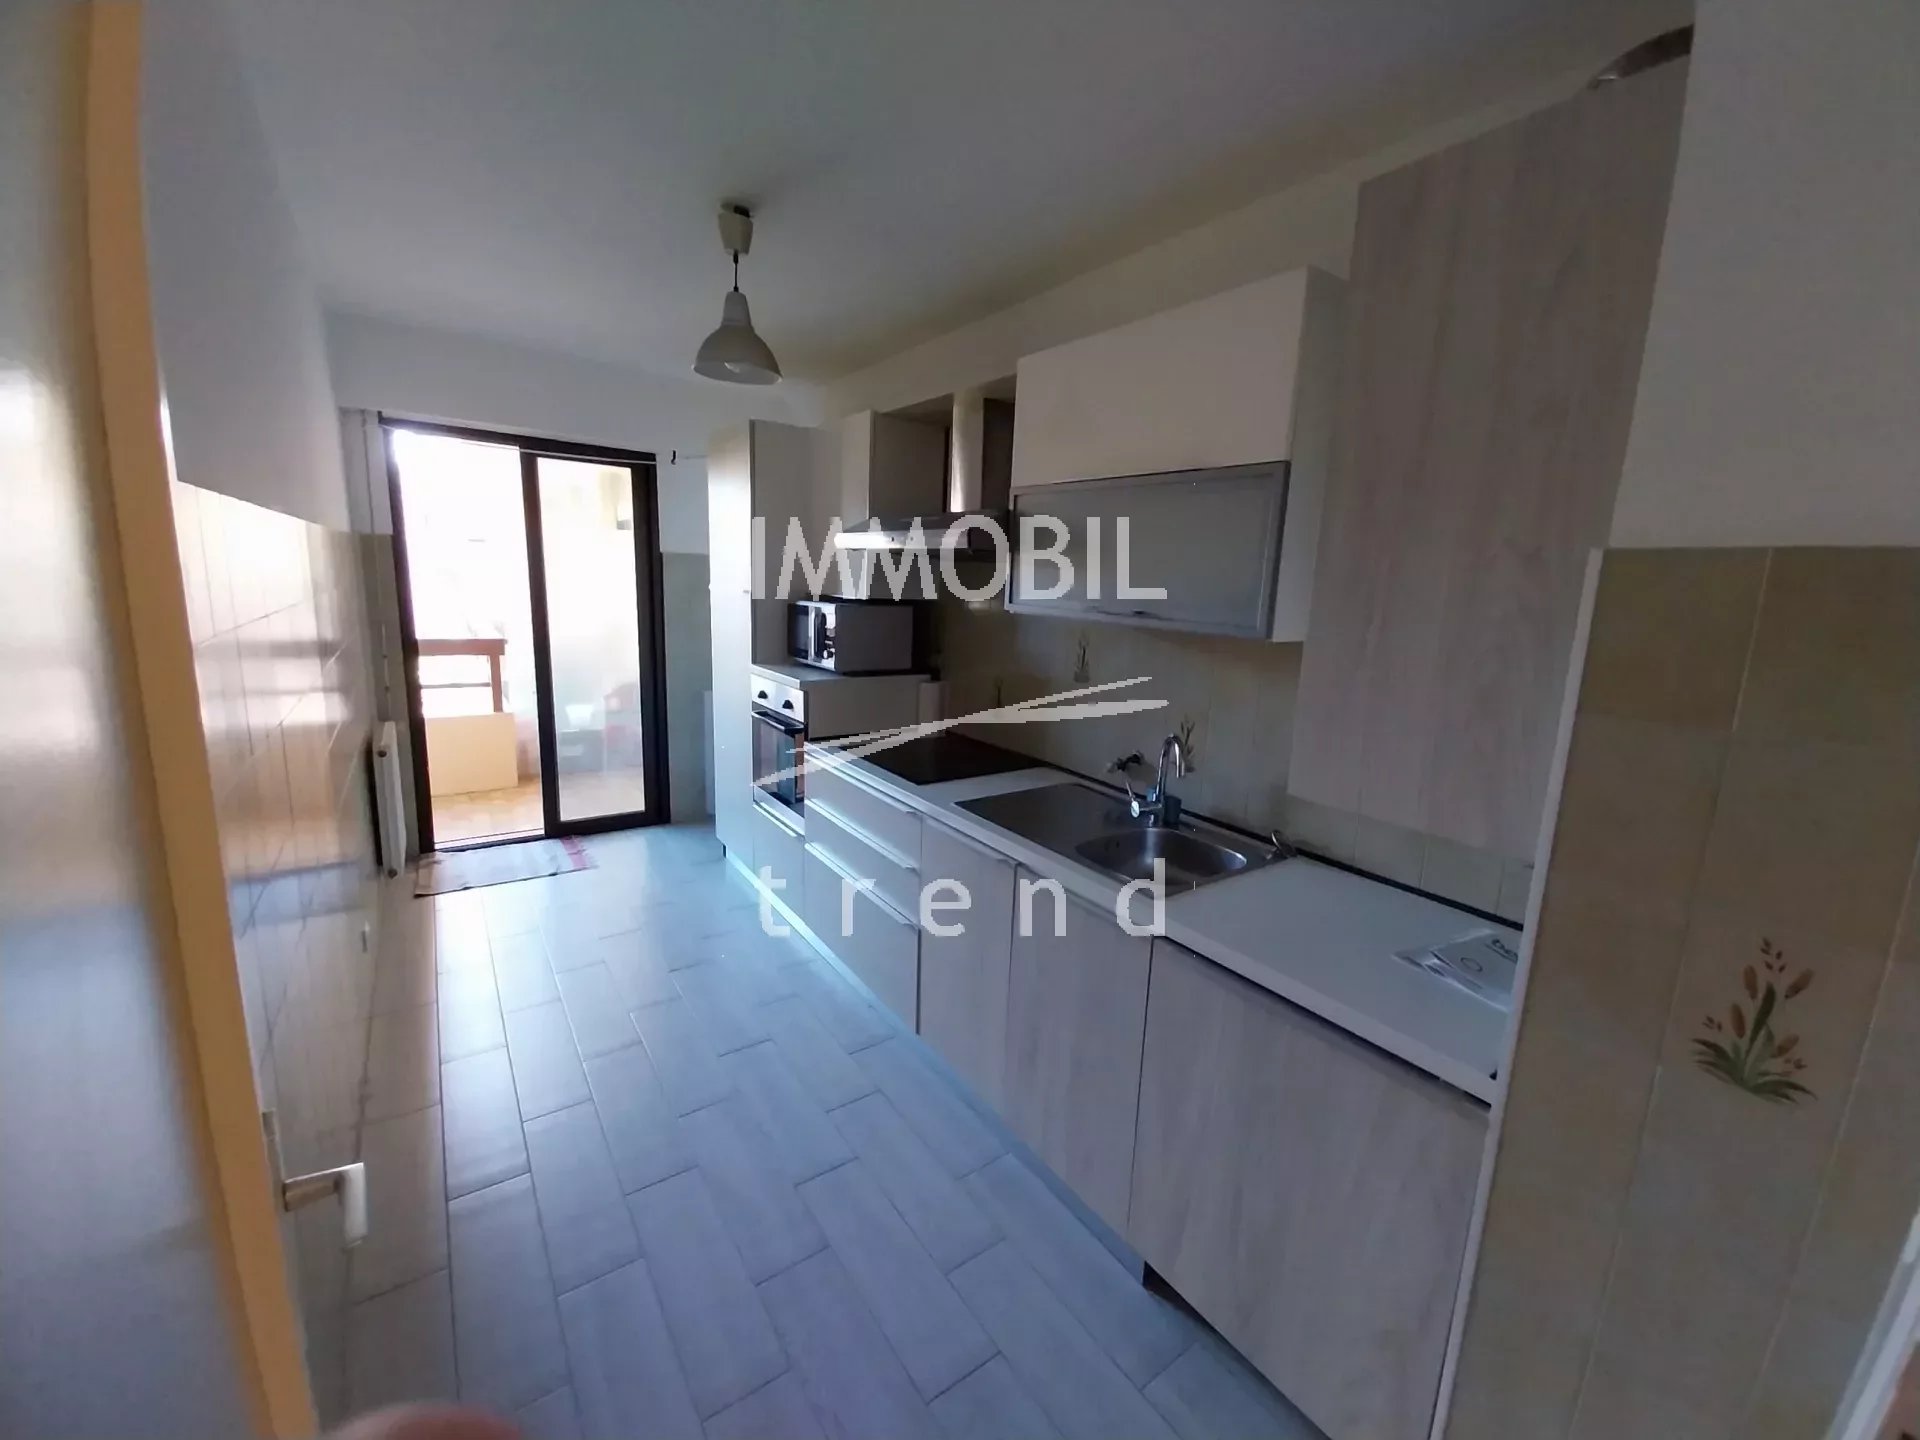 MENTON REAL ESTATE - 1 bedroom apartment for sale with balcony and cellar